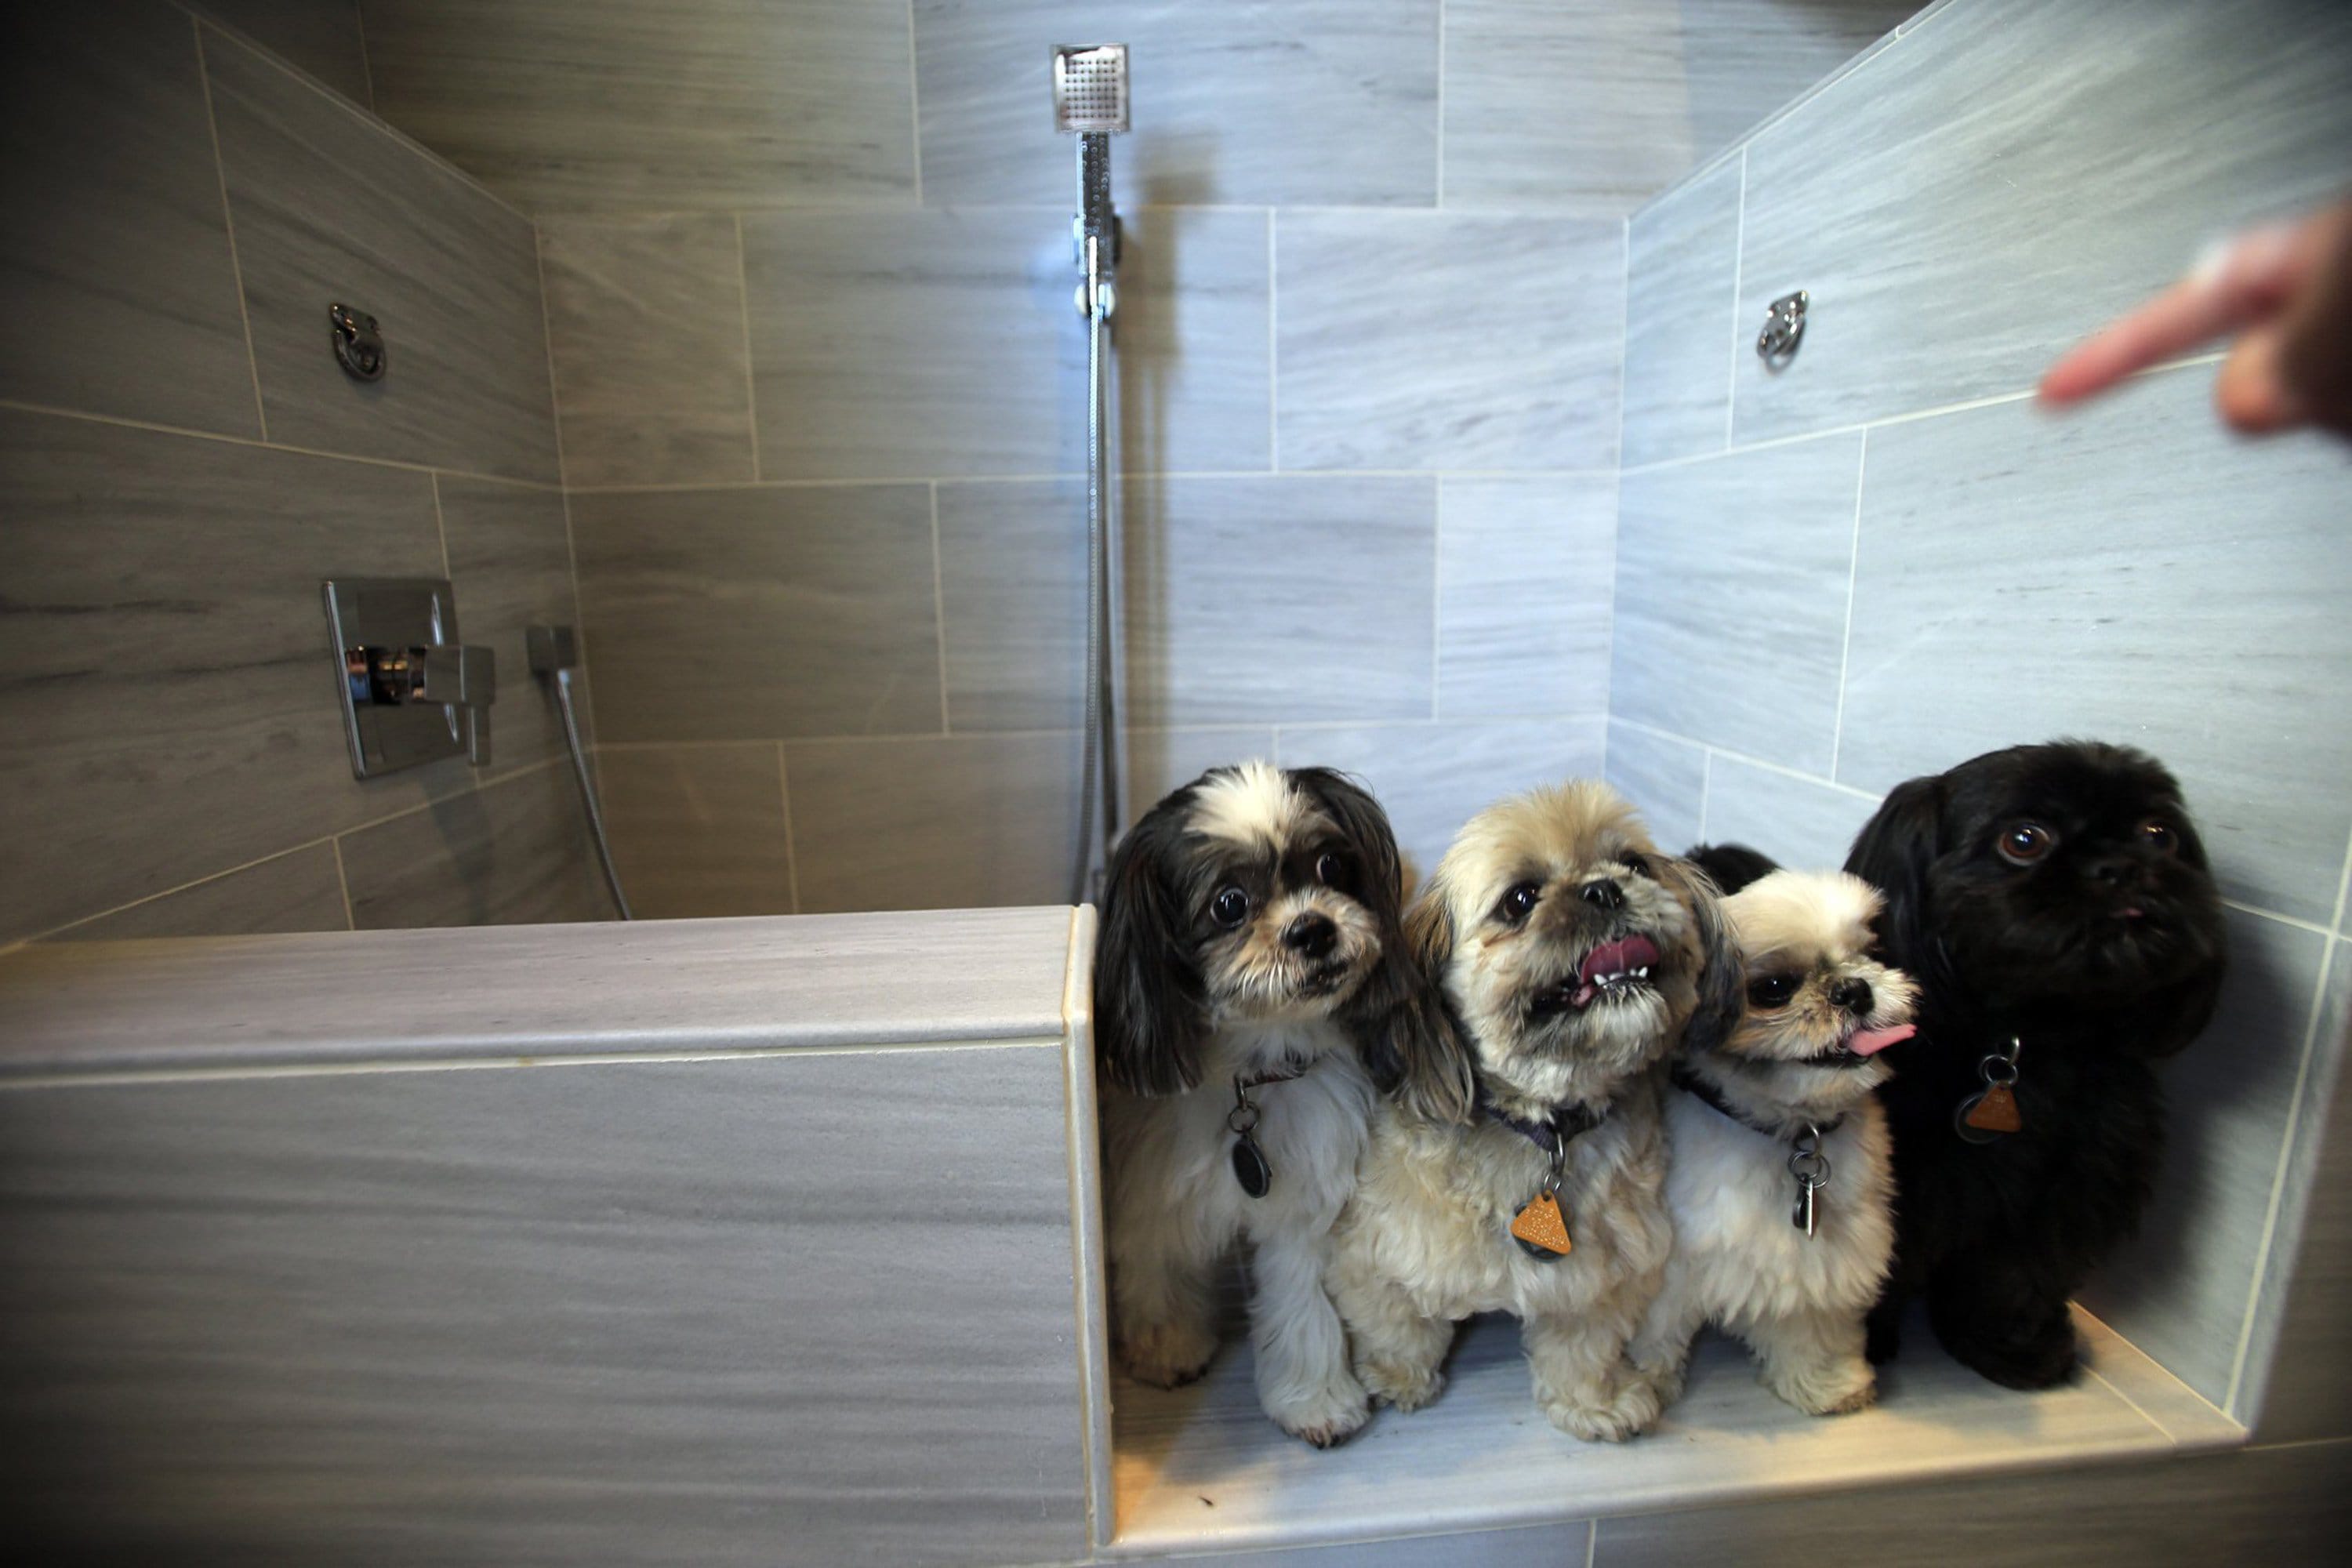 From left, Boo, Olivia, Buzz and Buddy, all dogs belonging to a Standard Pacific employee, check out the pet spa suite option in the new homes in their Avignon development at the new Blackstone community Aug. 4, 2014 in Brea, Calif. Amenities in the pet suite include a step-in wash station with a hand-held shower spray, a commercial-sized pet dryer, bunk beds, cabinets for toys and treats, a flat screen TV, and a washer-dryer, just for the pets.